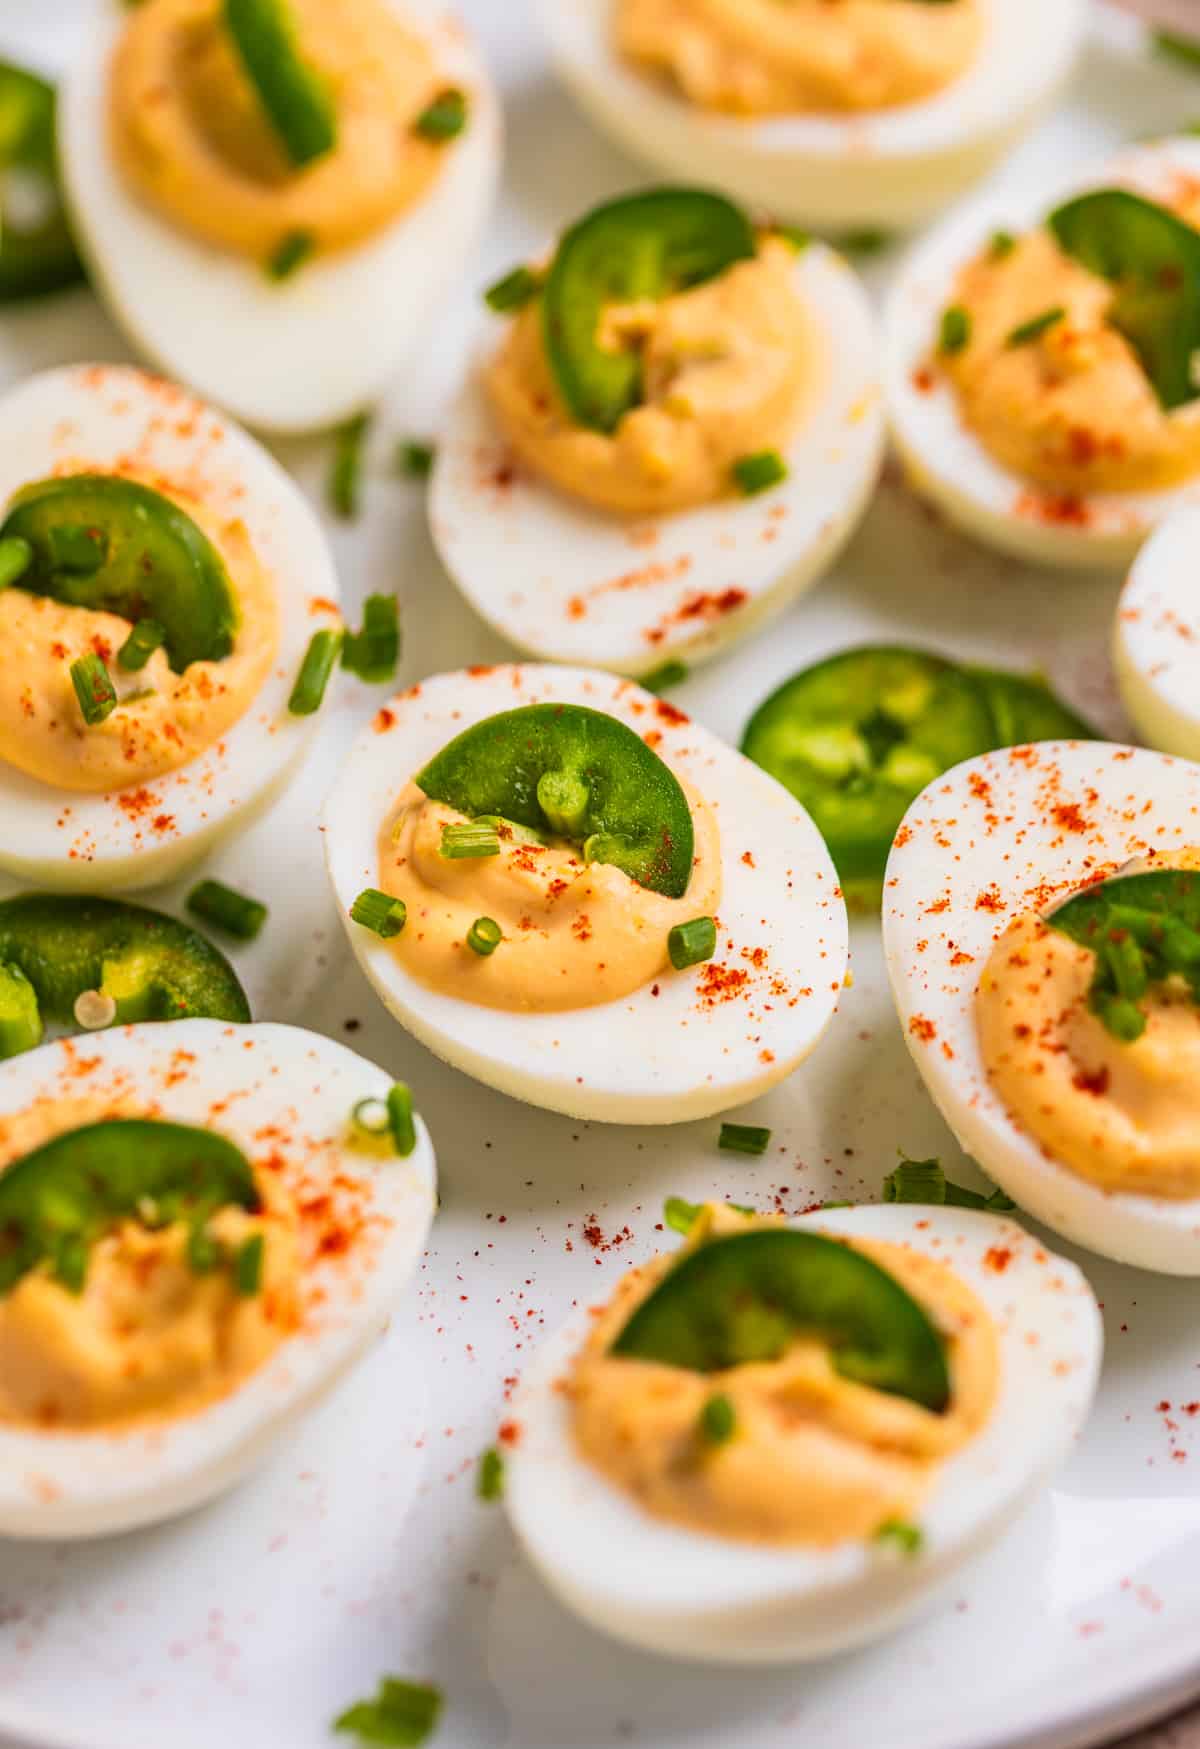 White dish with spicy jalapeño deviled eggs garnished with chives, paprika and sliced jalapeño.